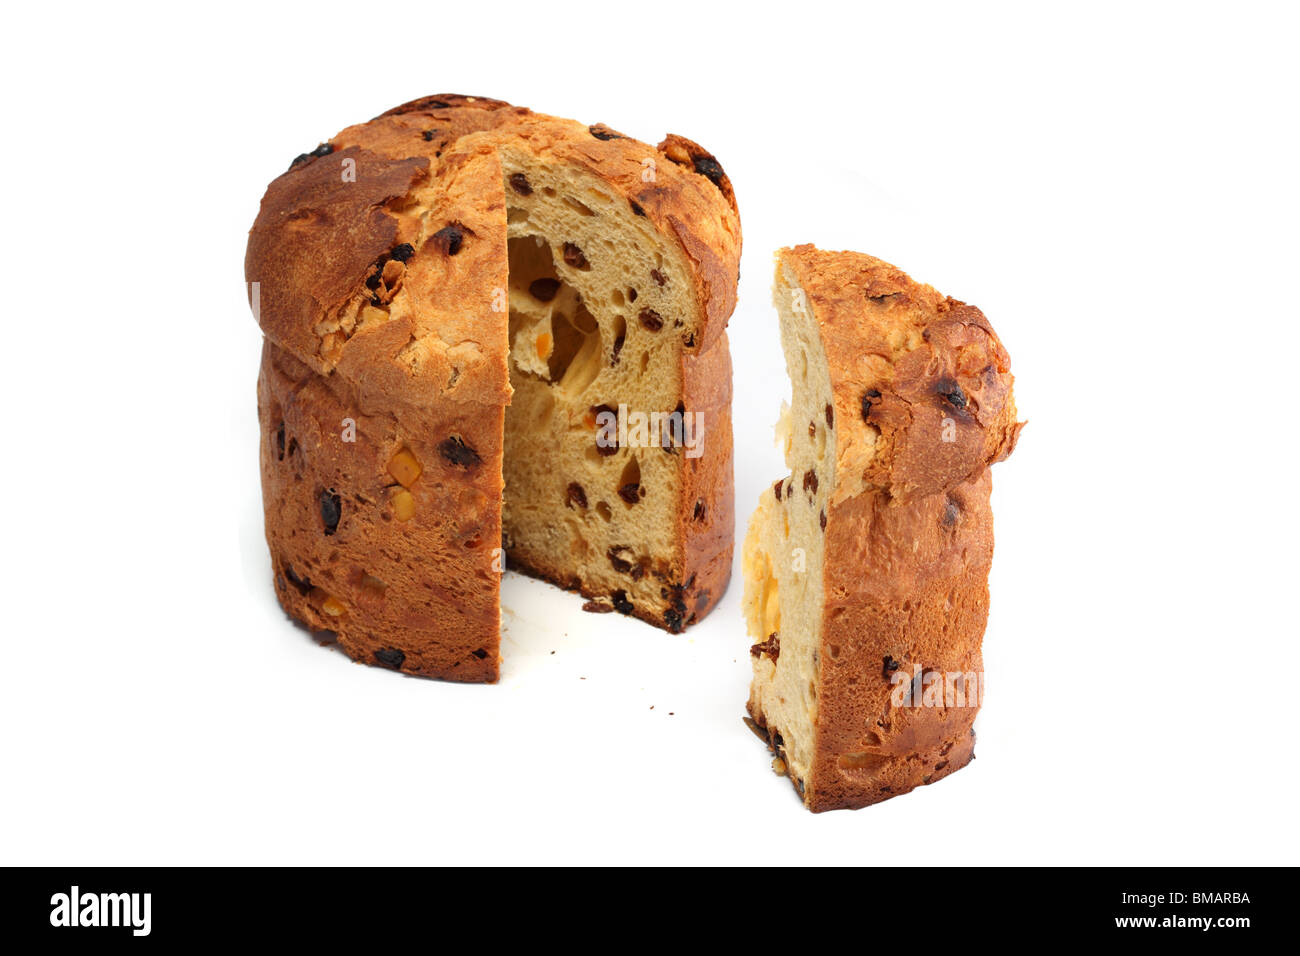 Italian panettone cake Christmas bread typical traditional dessert food edible starving whole health healthy closeup close-up cl Stock Photo